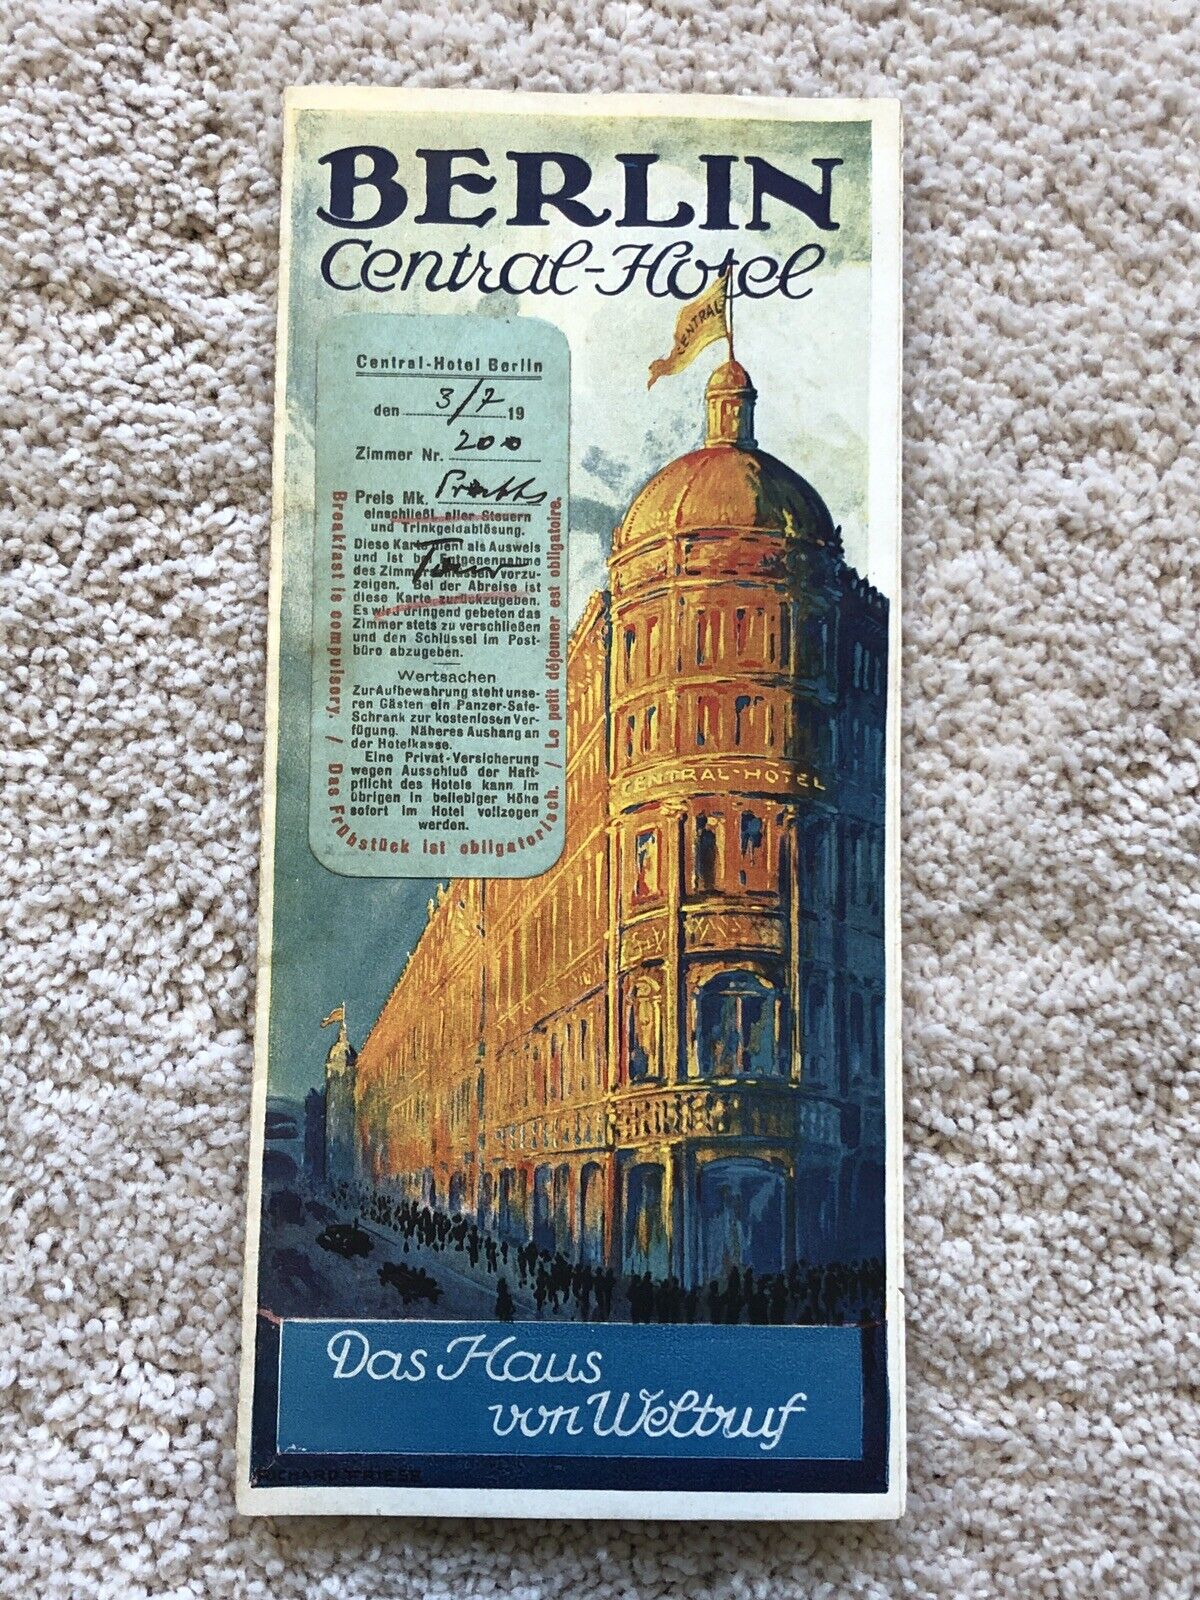 Antique 1919 Berlin Central Hotel Brochure Germany w/ Check-in Stub